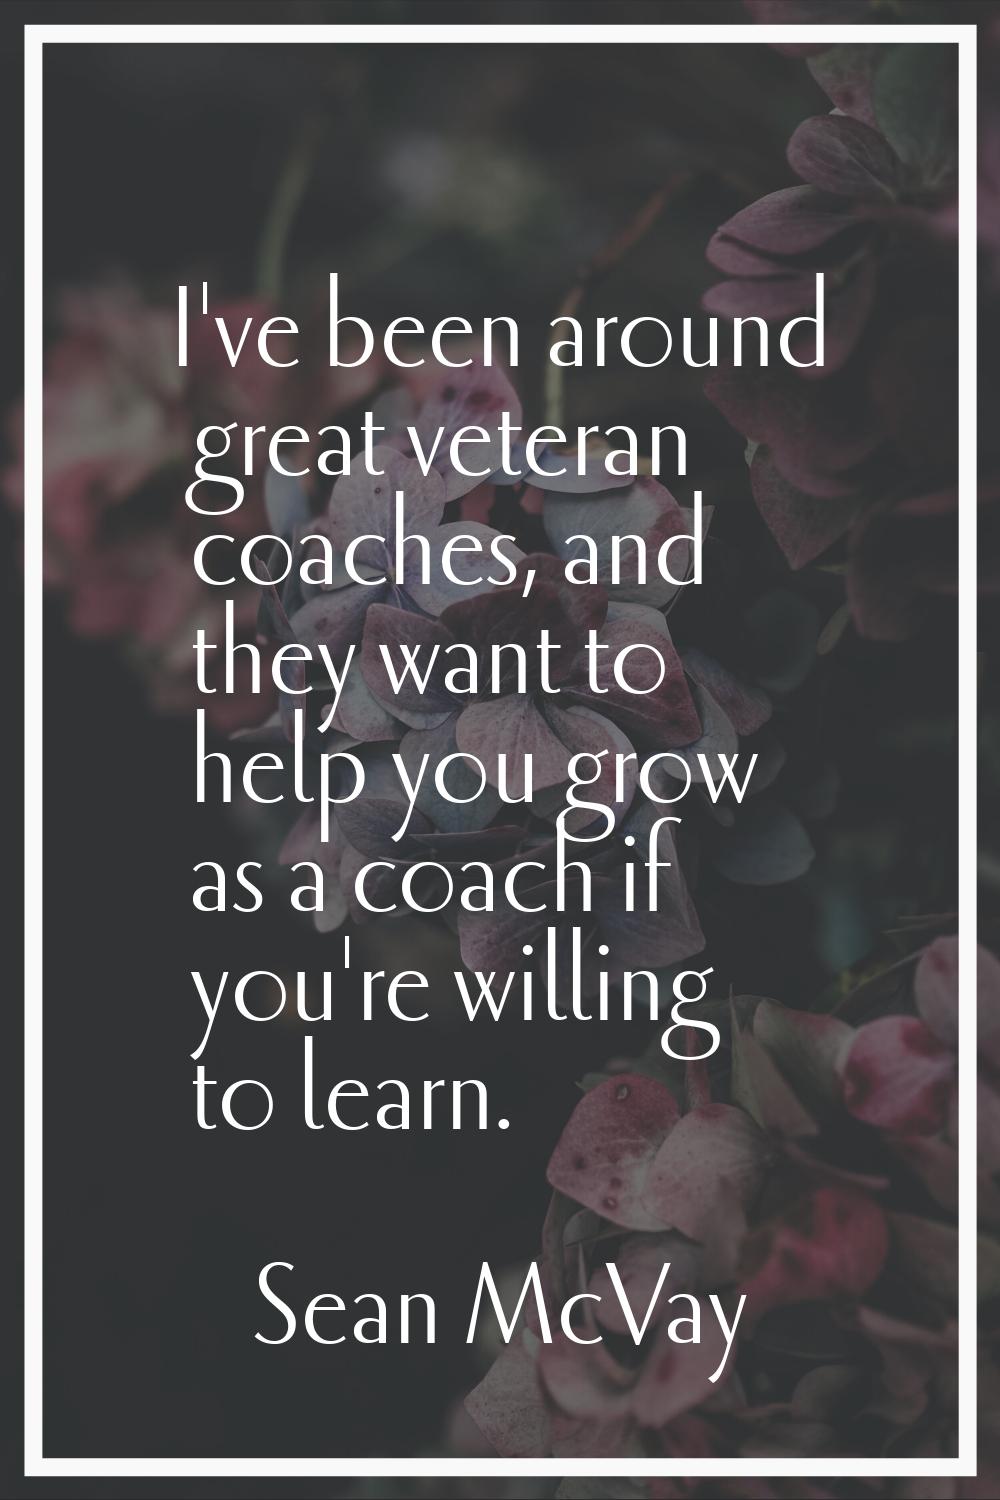 I've been around great veteran coaches, and they want to help you grow as a coach if you're willing